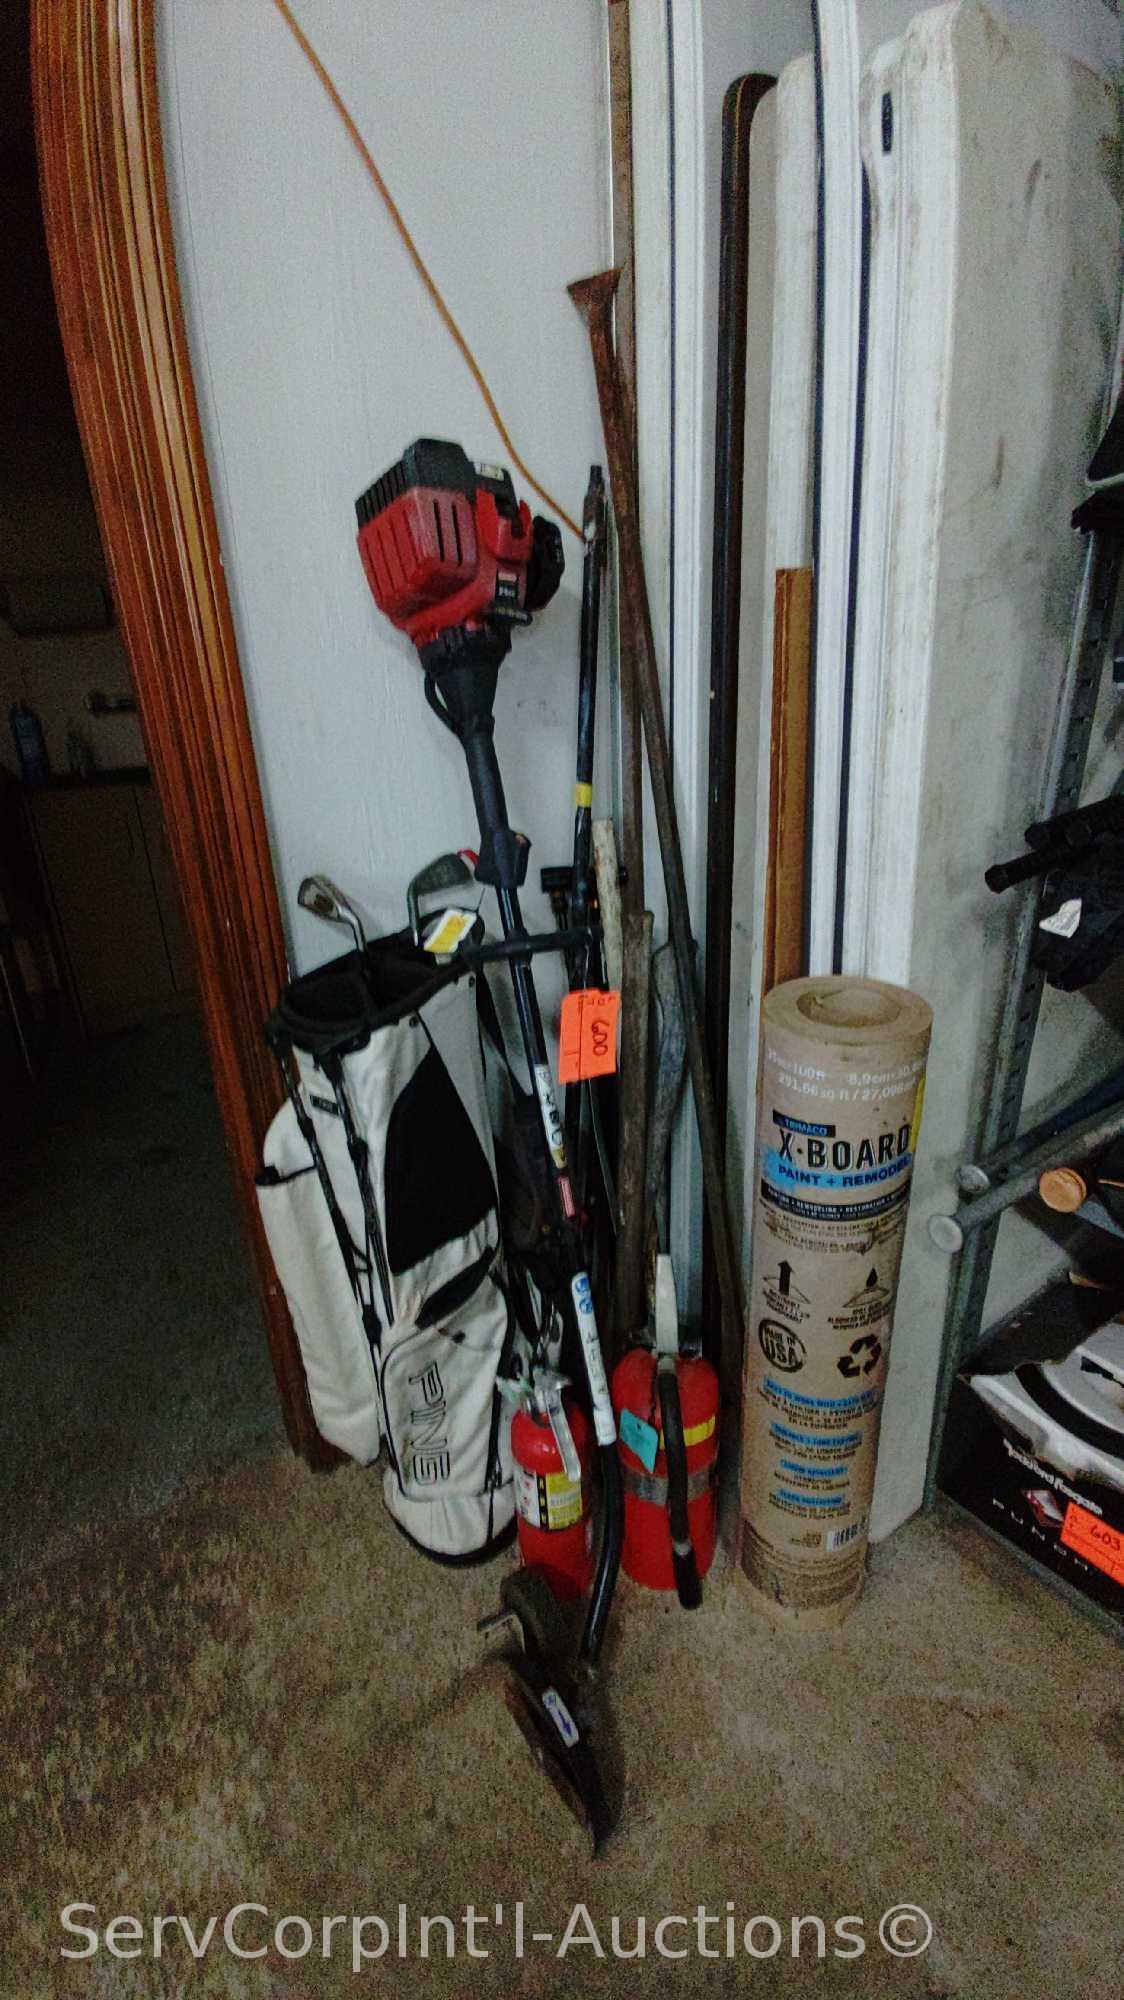 Lot of Axes, Golf Clubs, Fire Extinguishers, Craftsman Weed Trimmer, Replacement Handle, Pry Bars